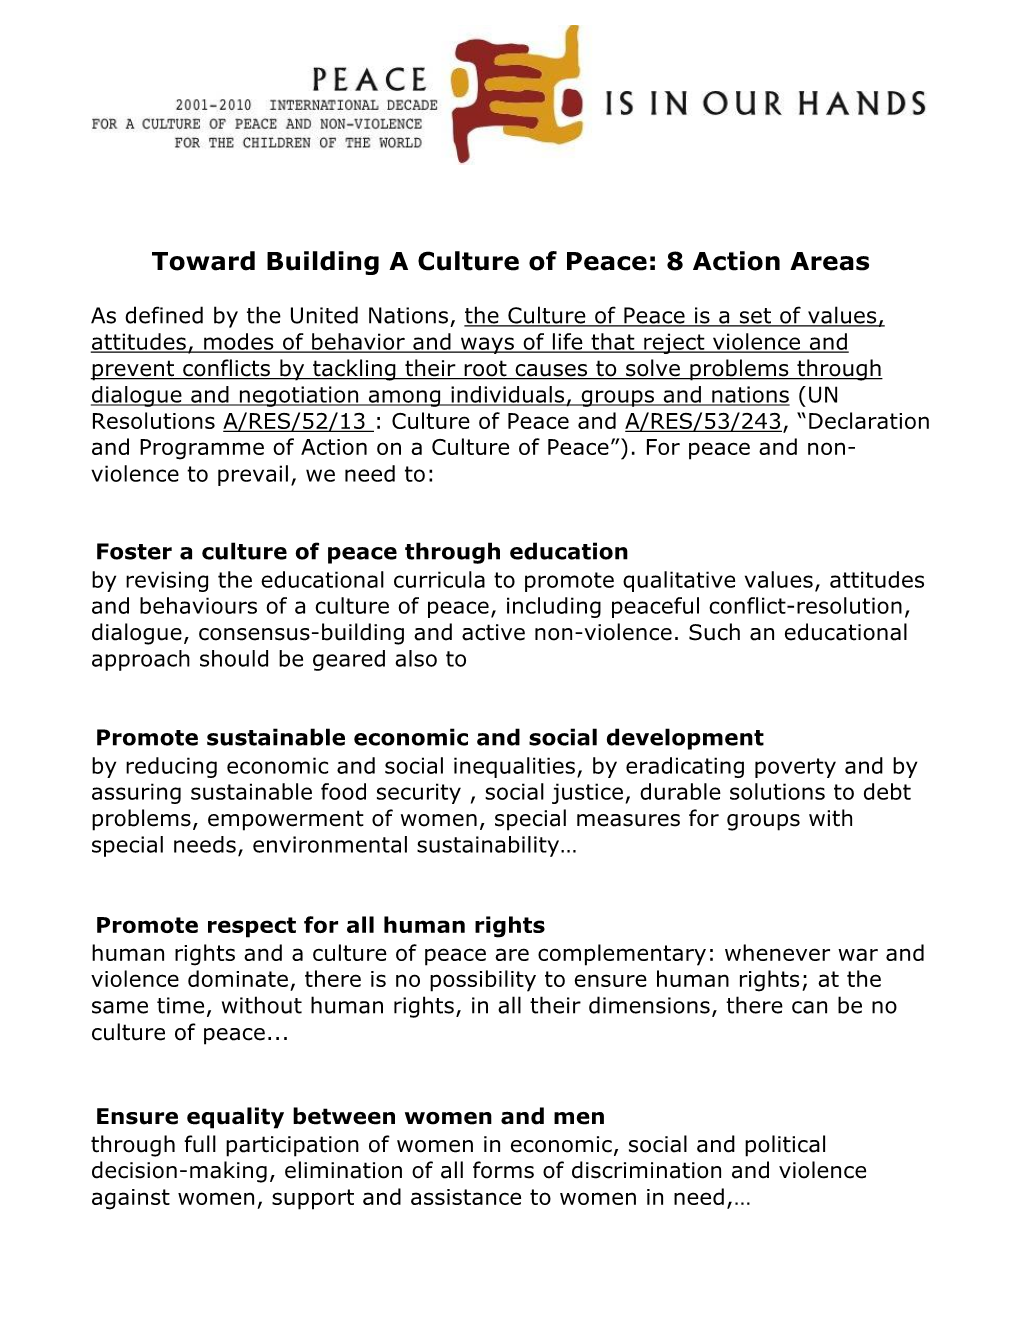 Toward Building a Culture of Peace: 8 Action Areas